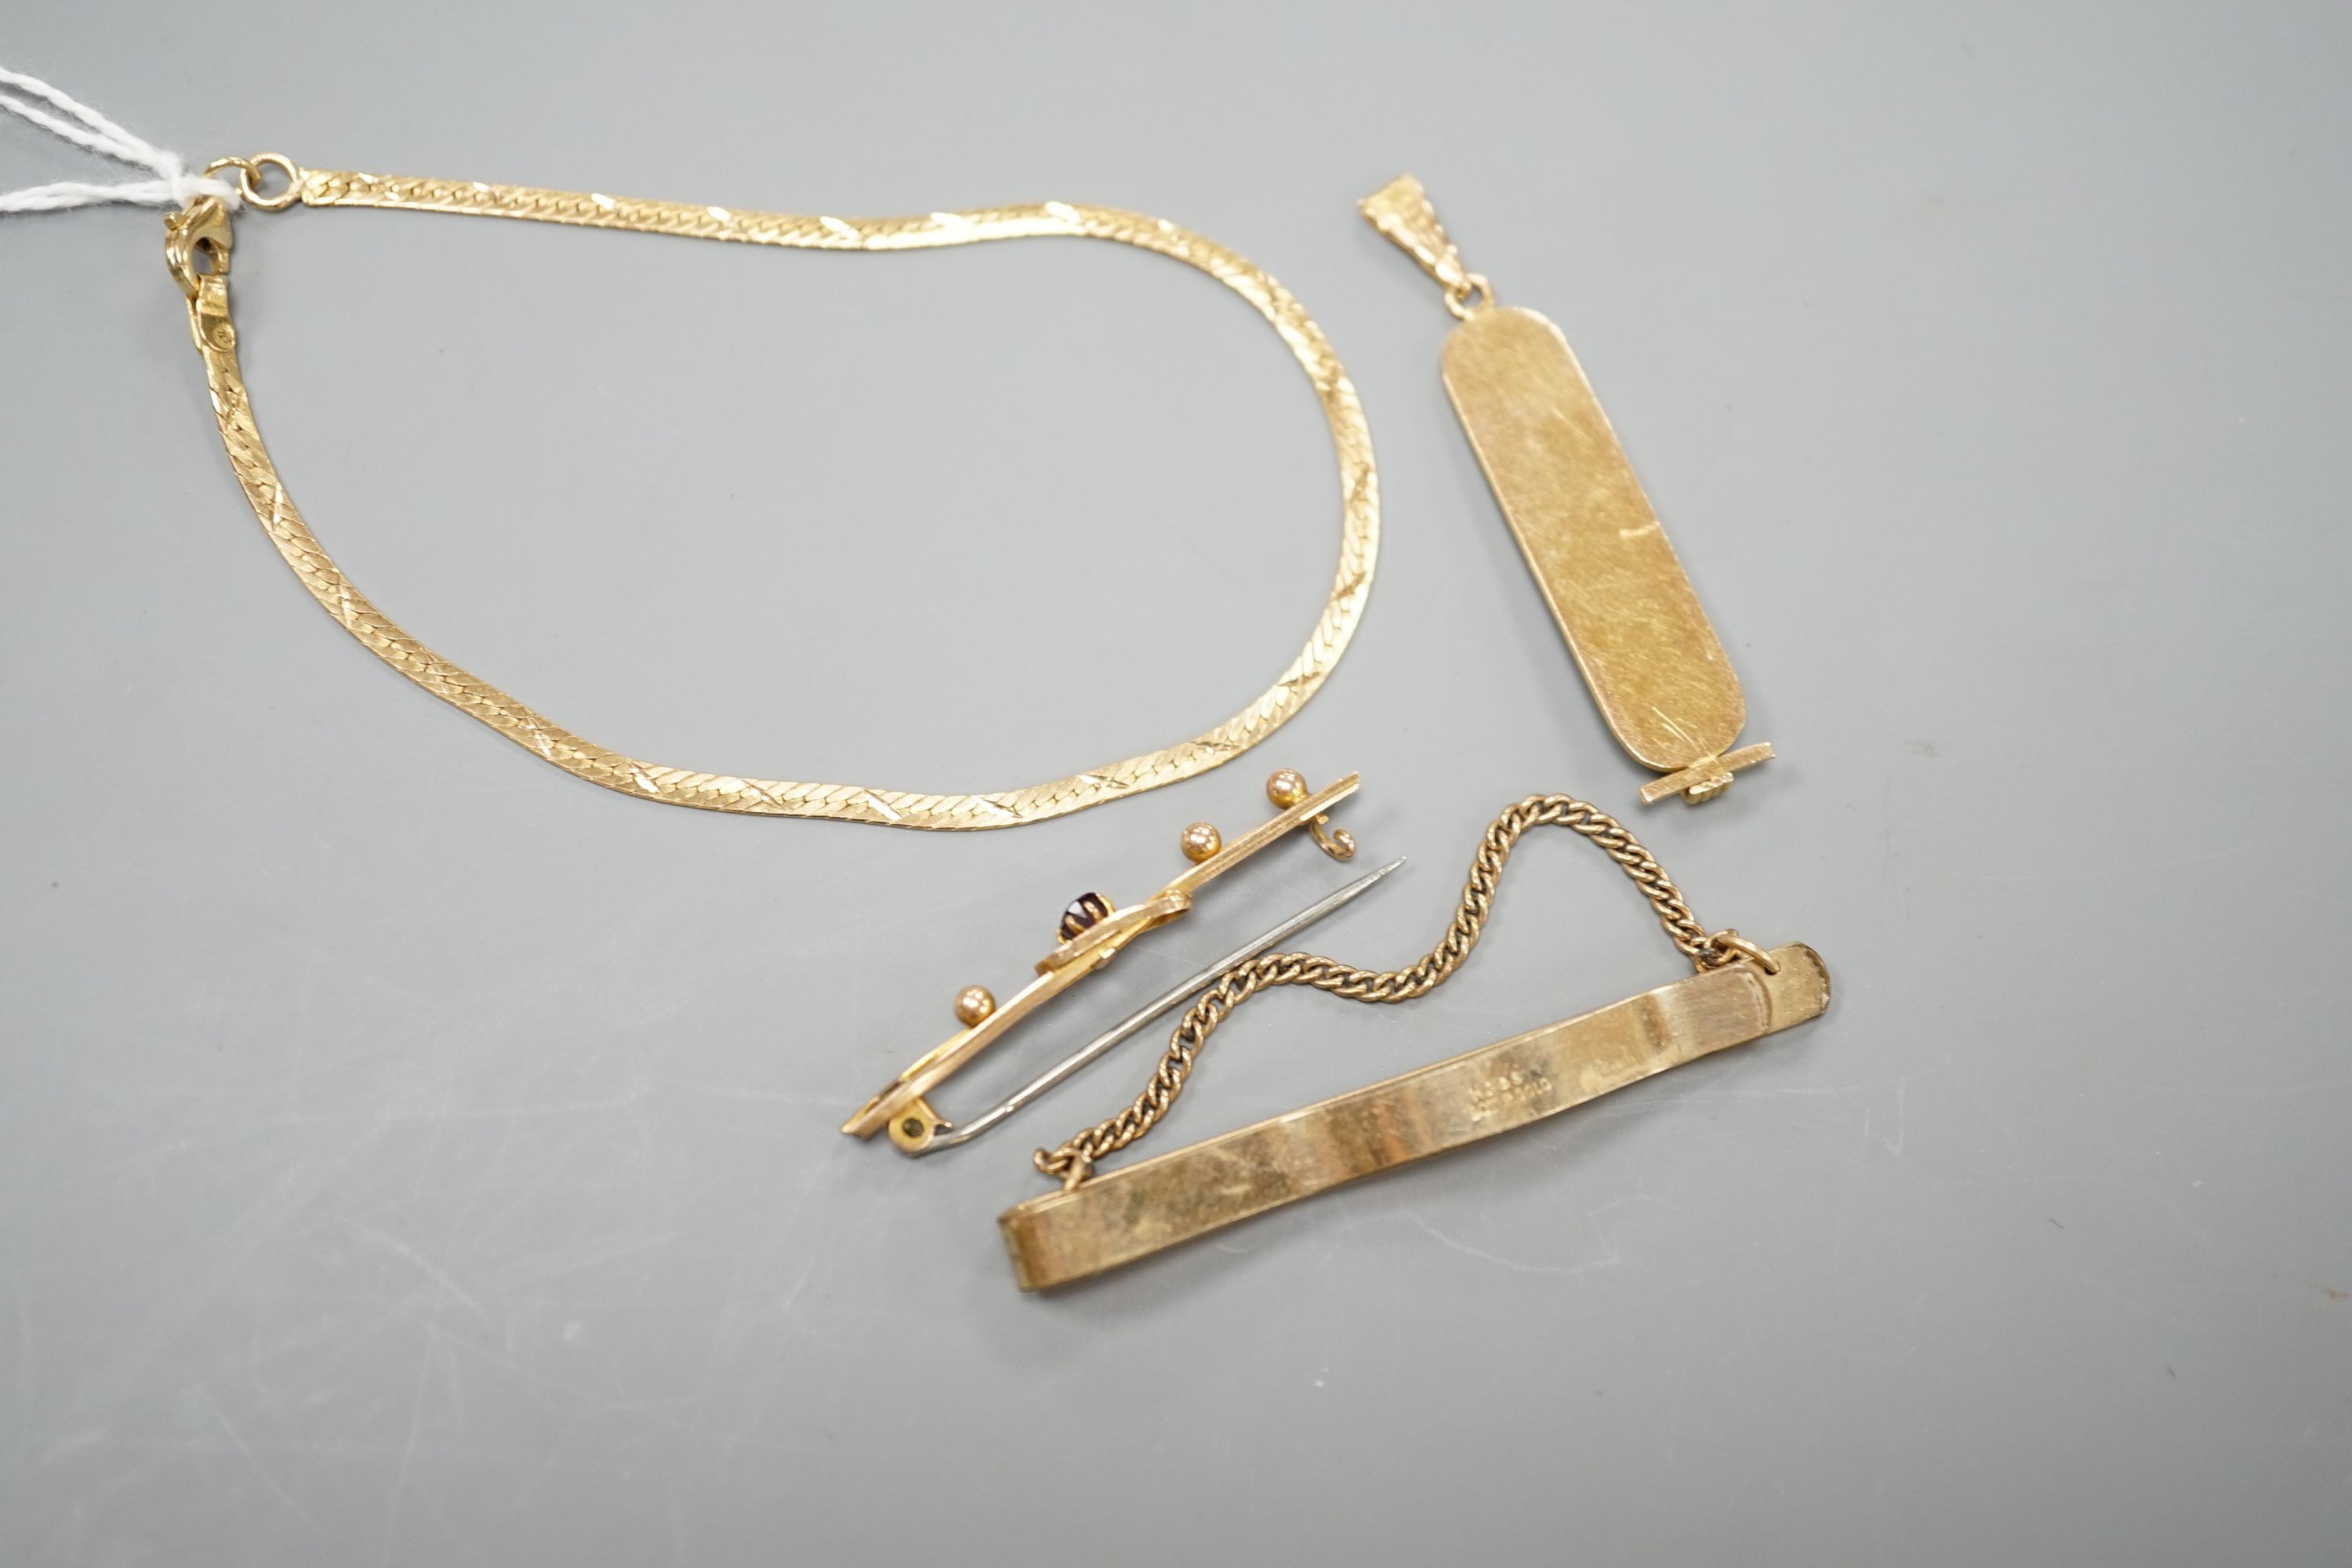 A Middle Eastern pendant and bracelet, gross 6.5 grams, together with a 9ct bar brooch and a rolled gold tie clip.